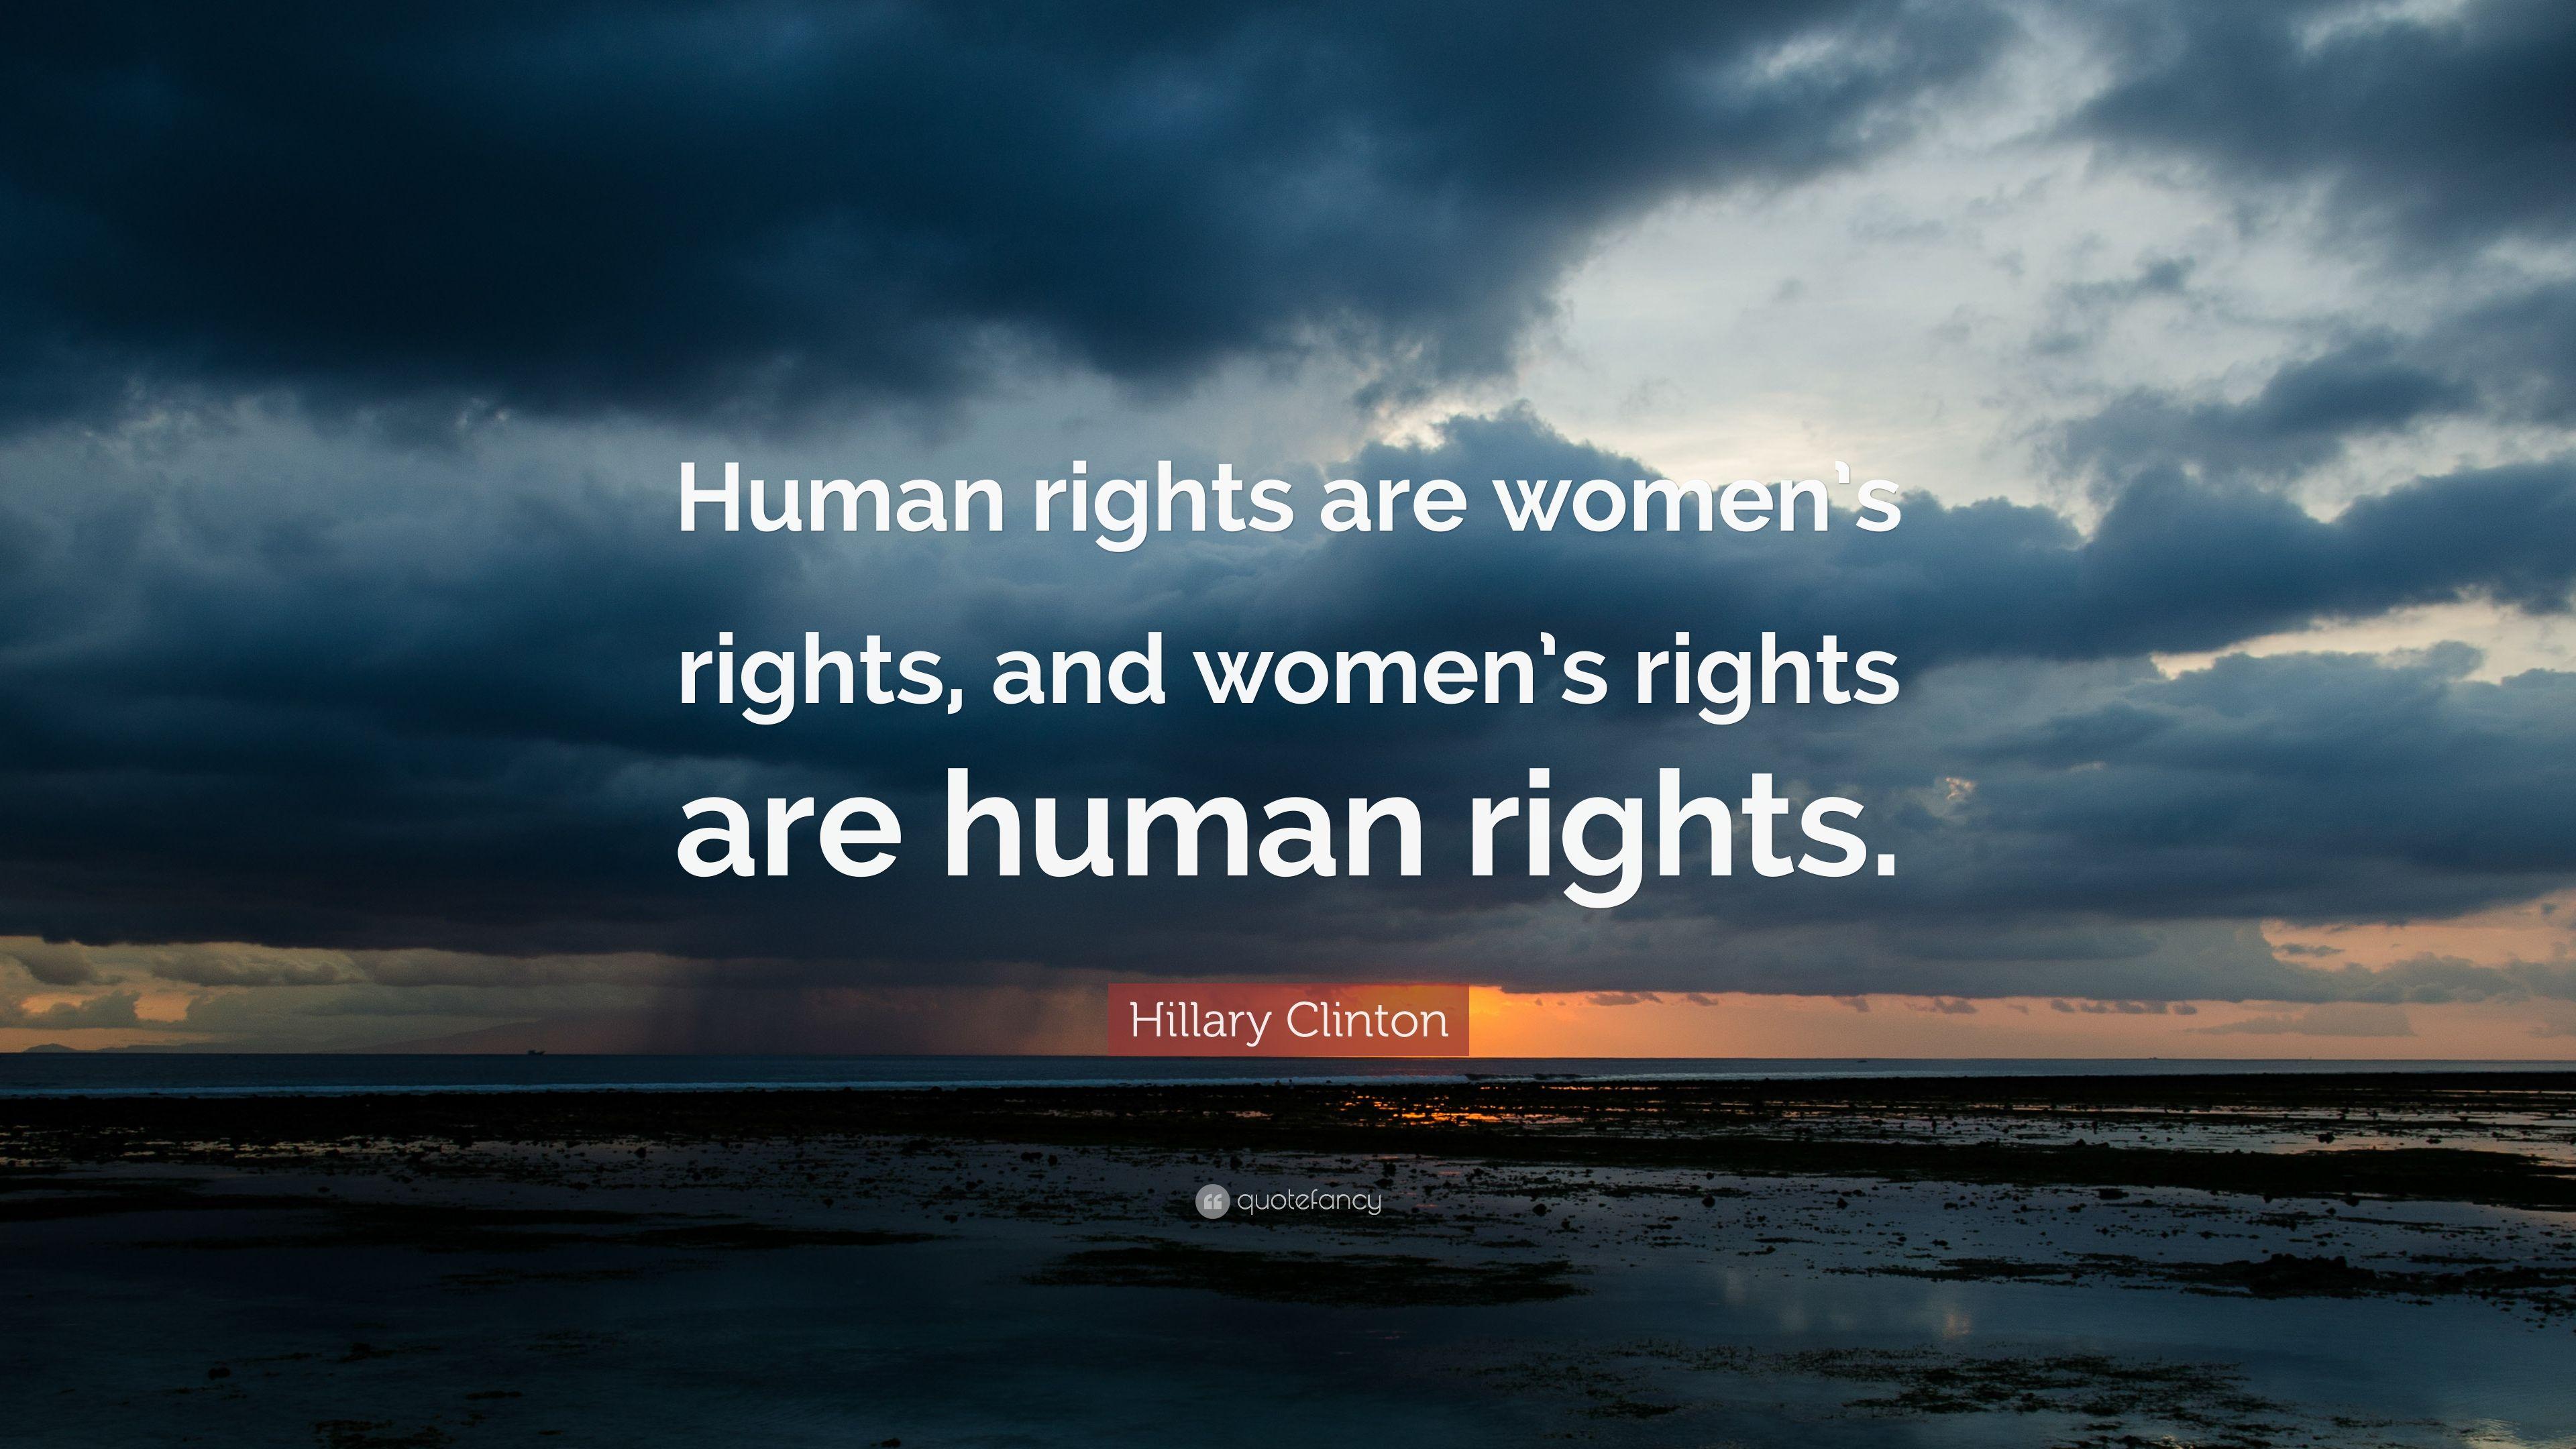 Hillary Clinton Quote: “Human rights are women's rights, and women's